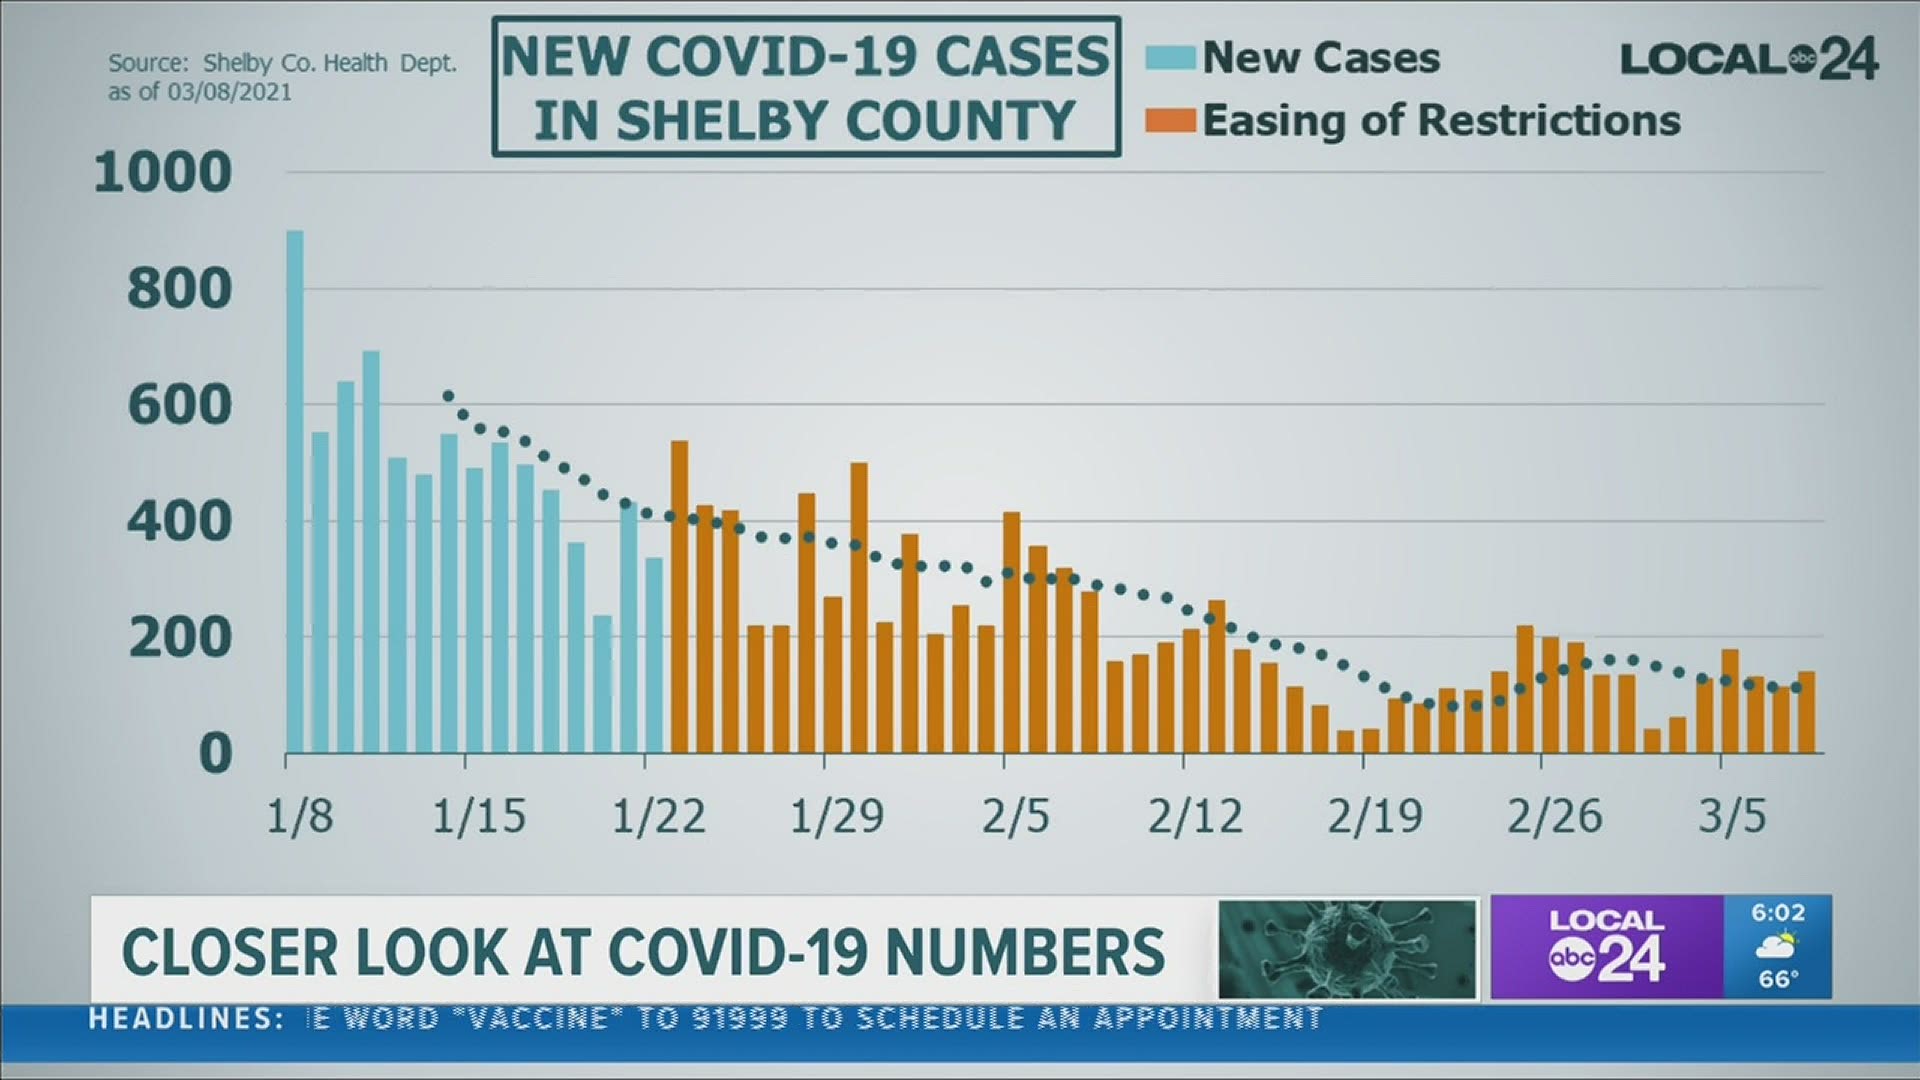 COVID-19 daily cases and hospitalization rates are highlighted.